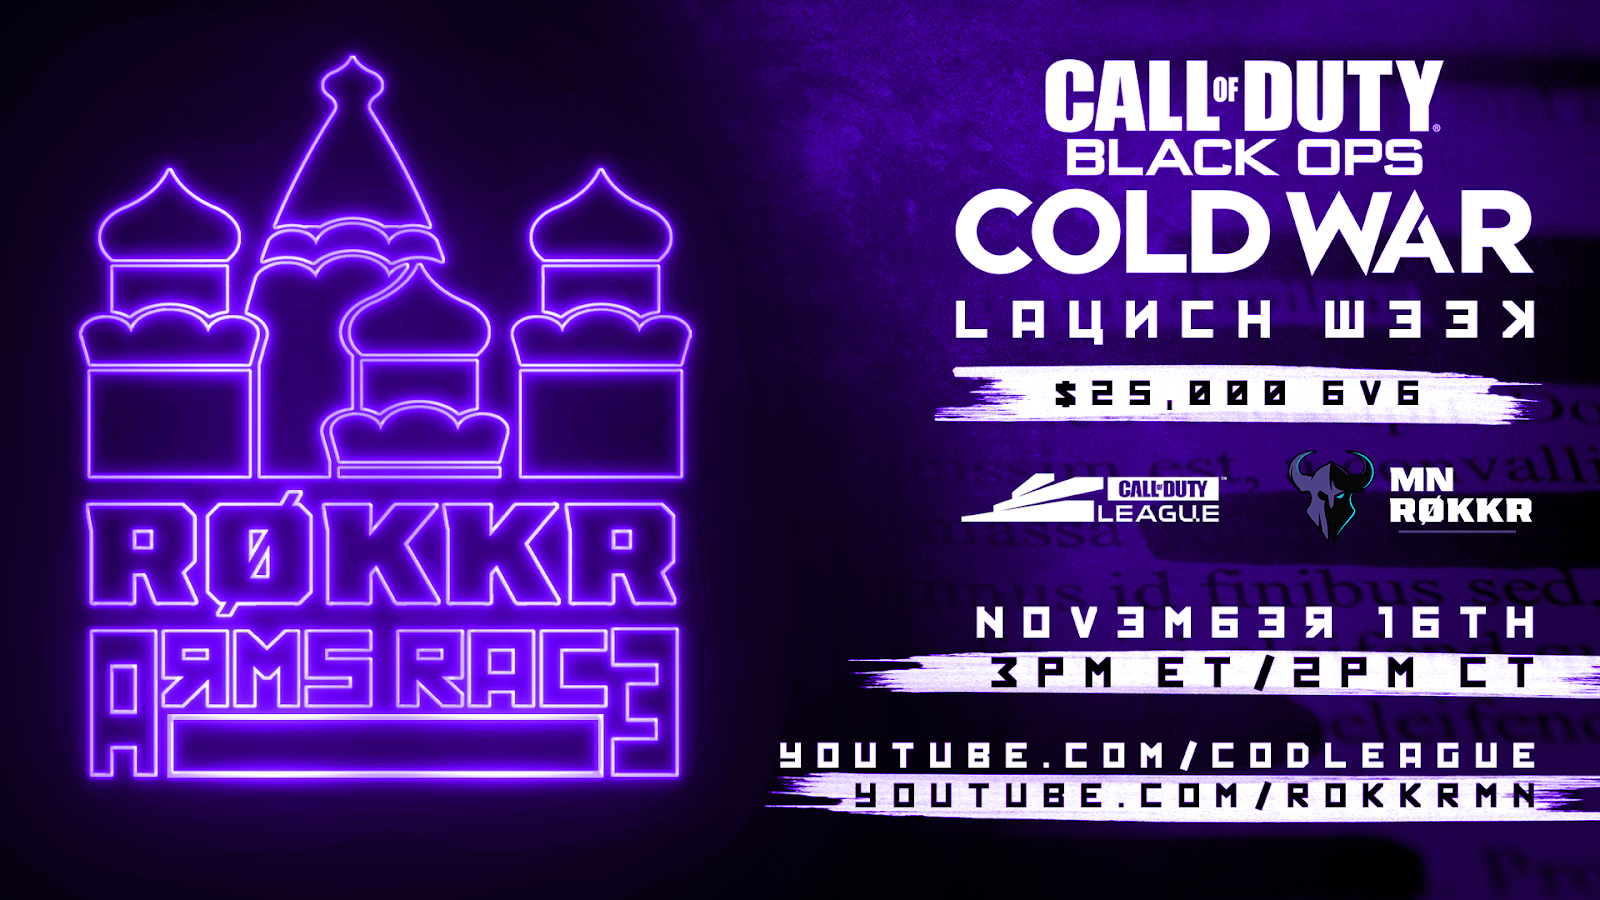 How to Watch $25K Rokkr Arms Race Black Ops Cold War Tournament